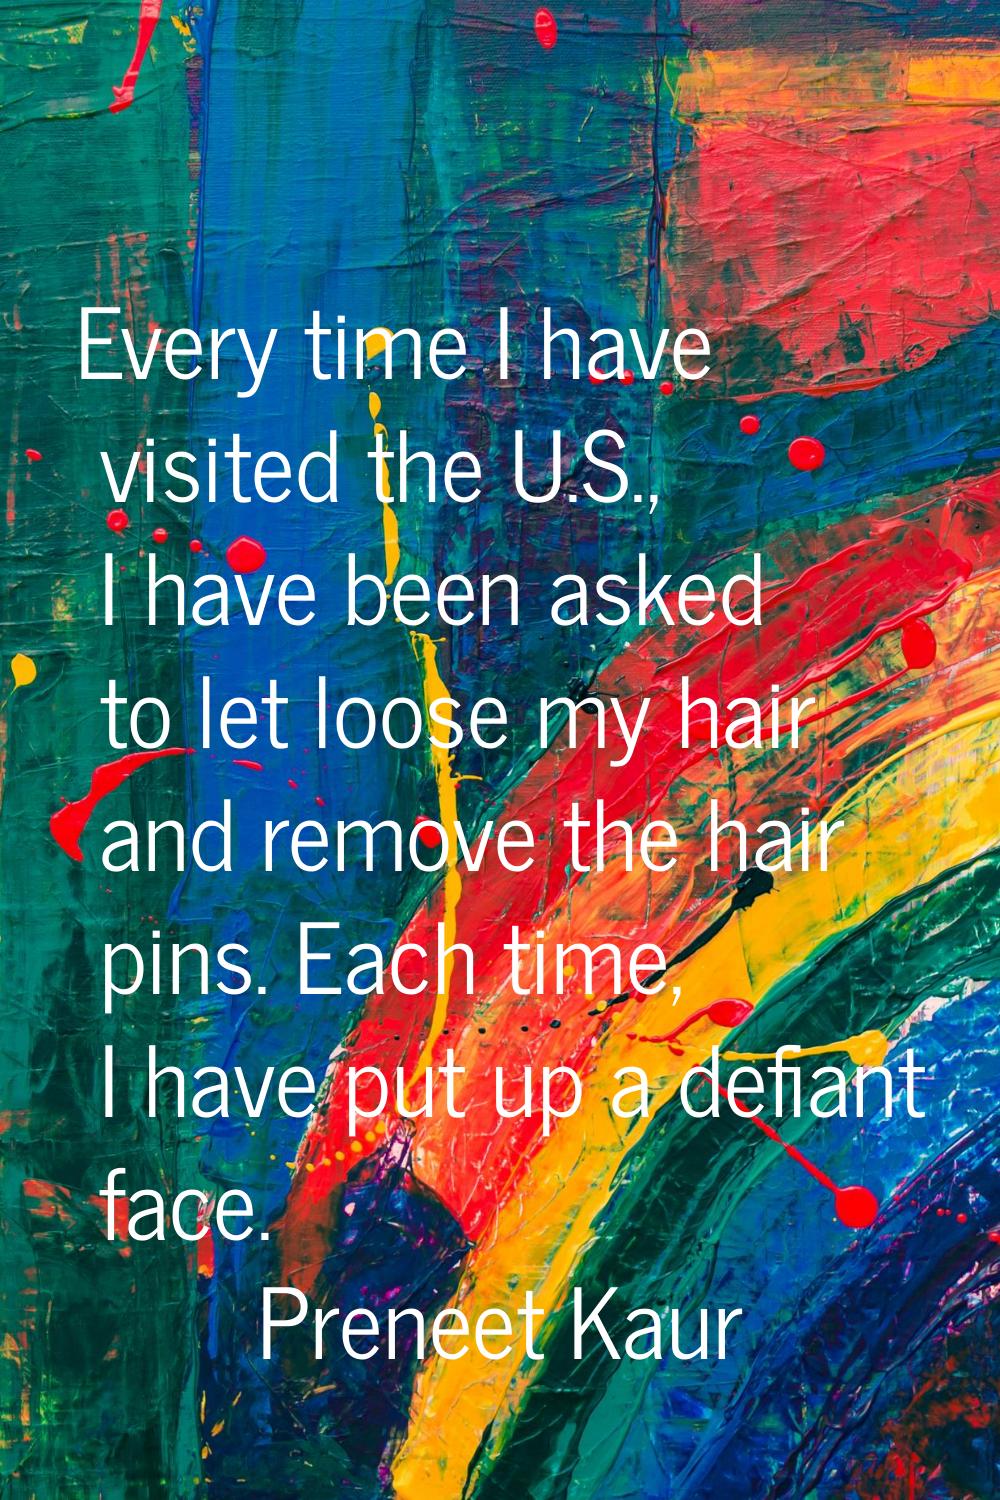 Every time I have visited the U.S., I have been asked to let loose my hair and remove the hair pins